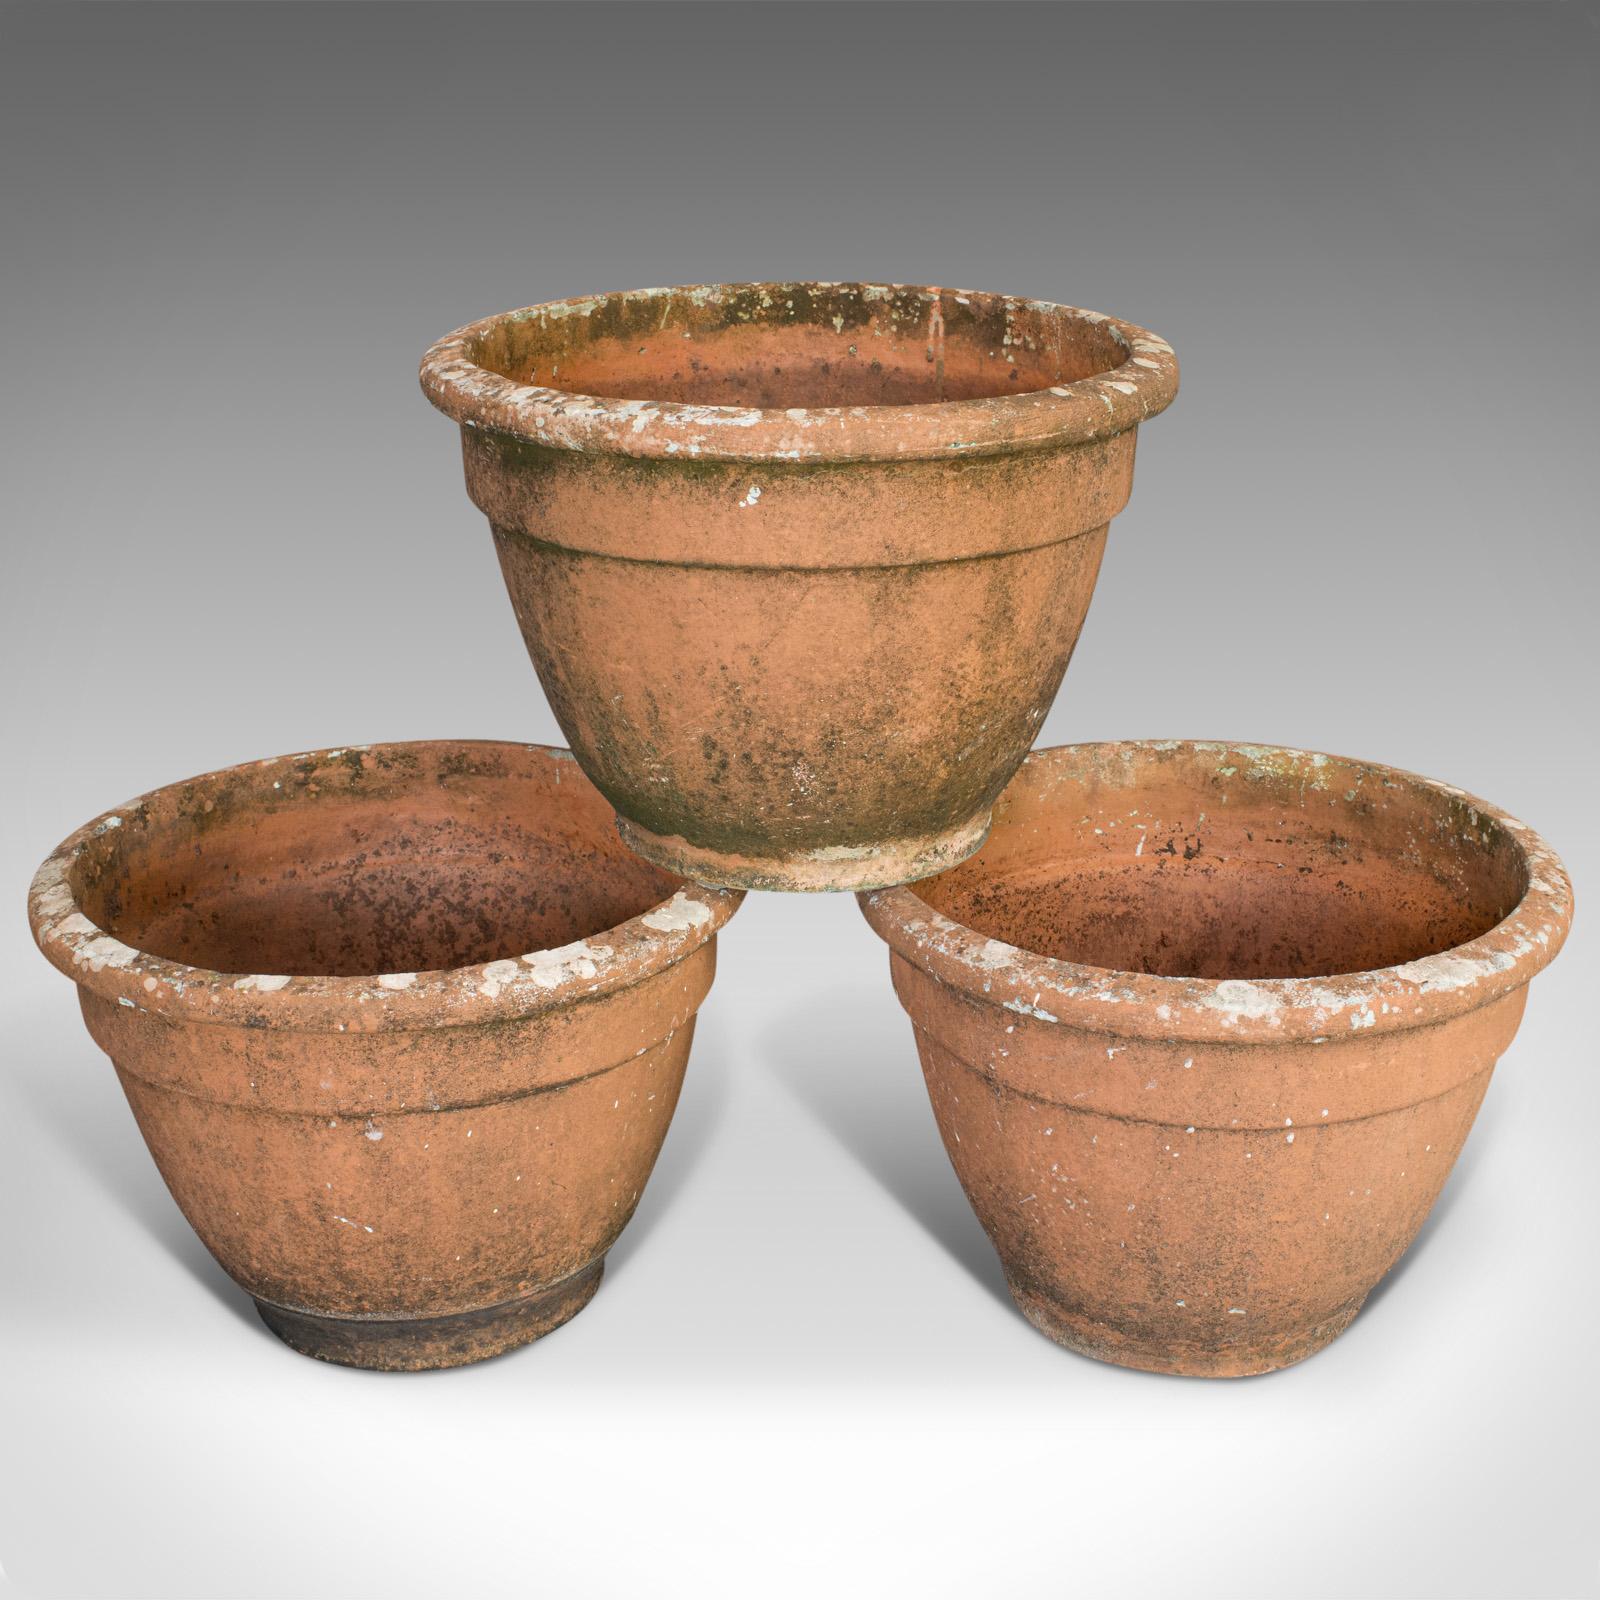 This is a set of three vintage planters. An English, terracotta large garden plant pot, dating to the 20th century.

Generously sized with appealing weathering
Displaying a desirable aged patina
Terracotta in good order with pleasingly natural